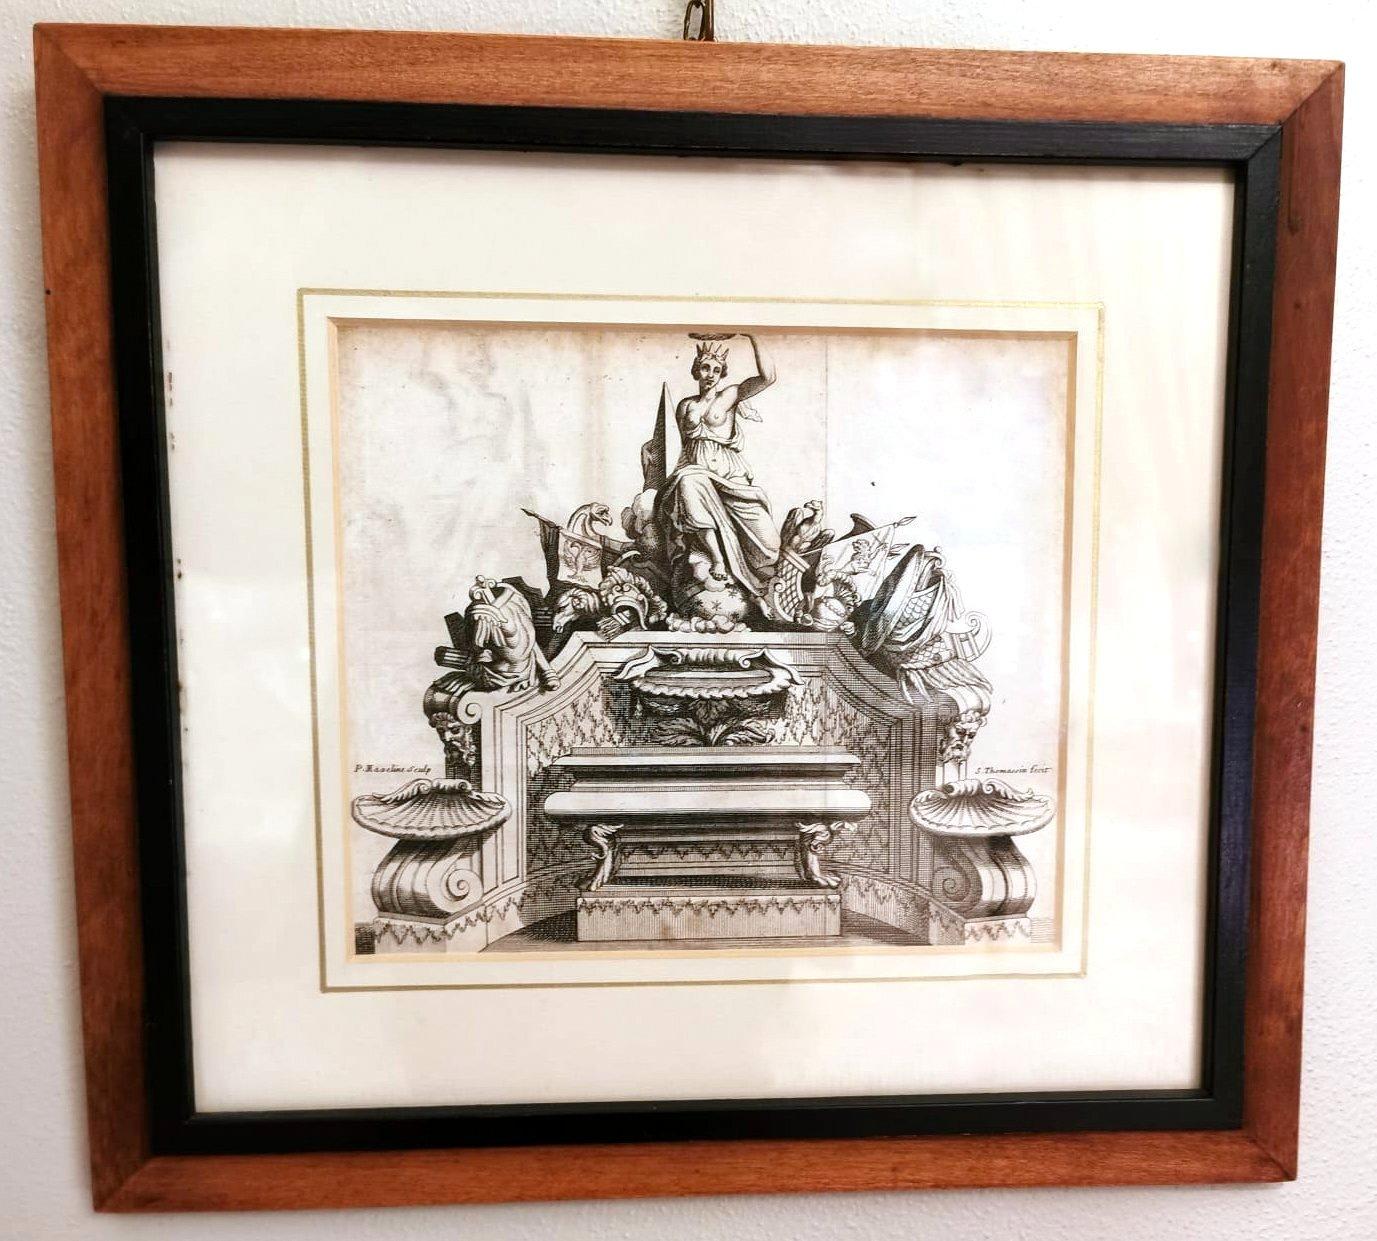 We kindly suggest you read the whole description, because with it we try to give you detailed technical and historical information to guarantee the authenticity of our objects.
Beautiful and meticulously detailed etching with sober wooden frame; the